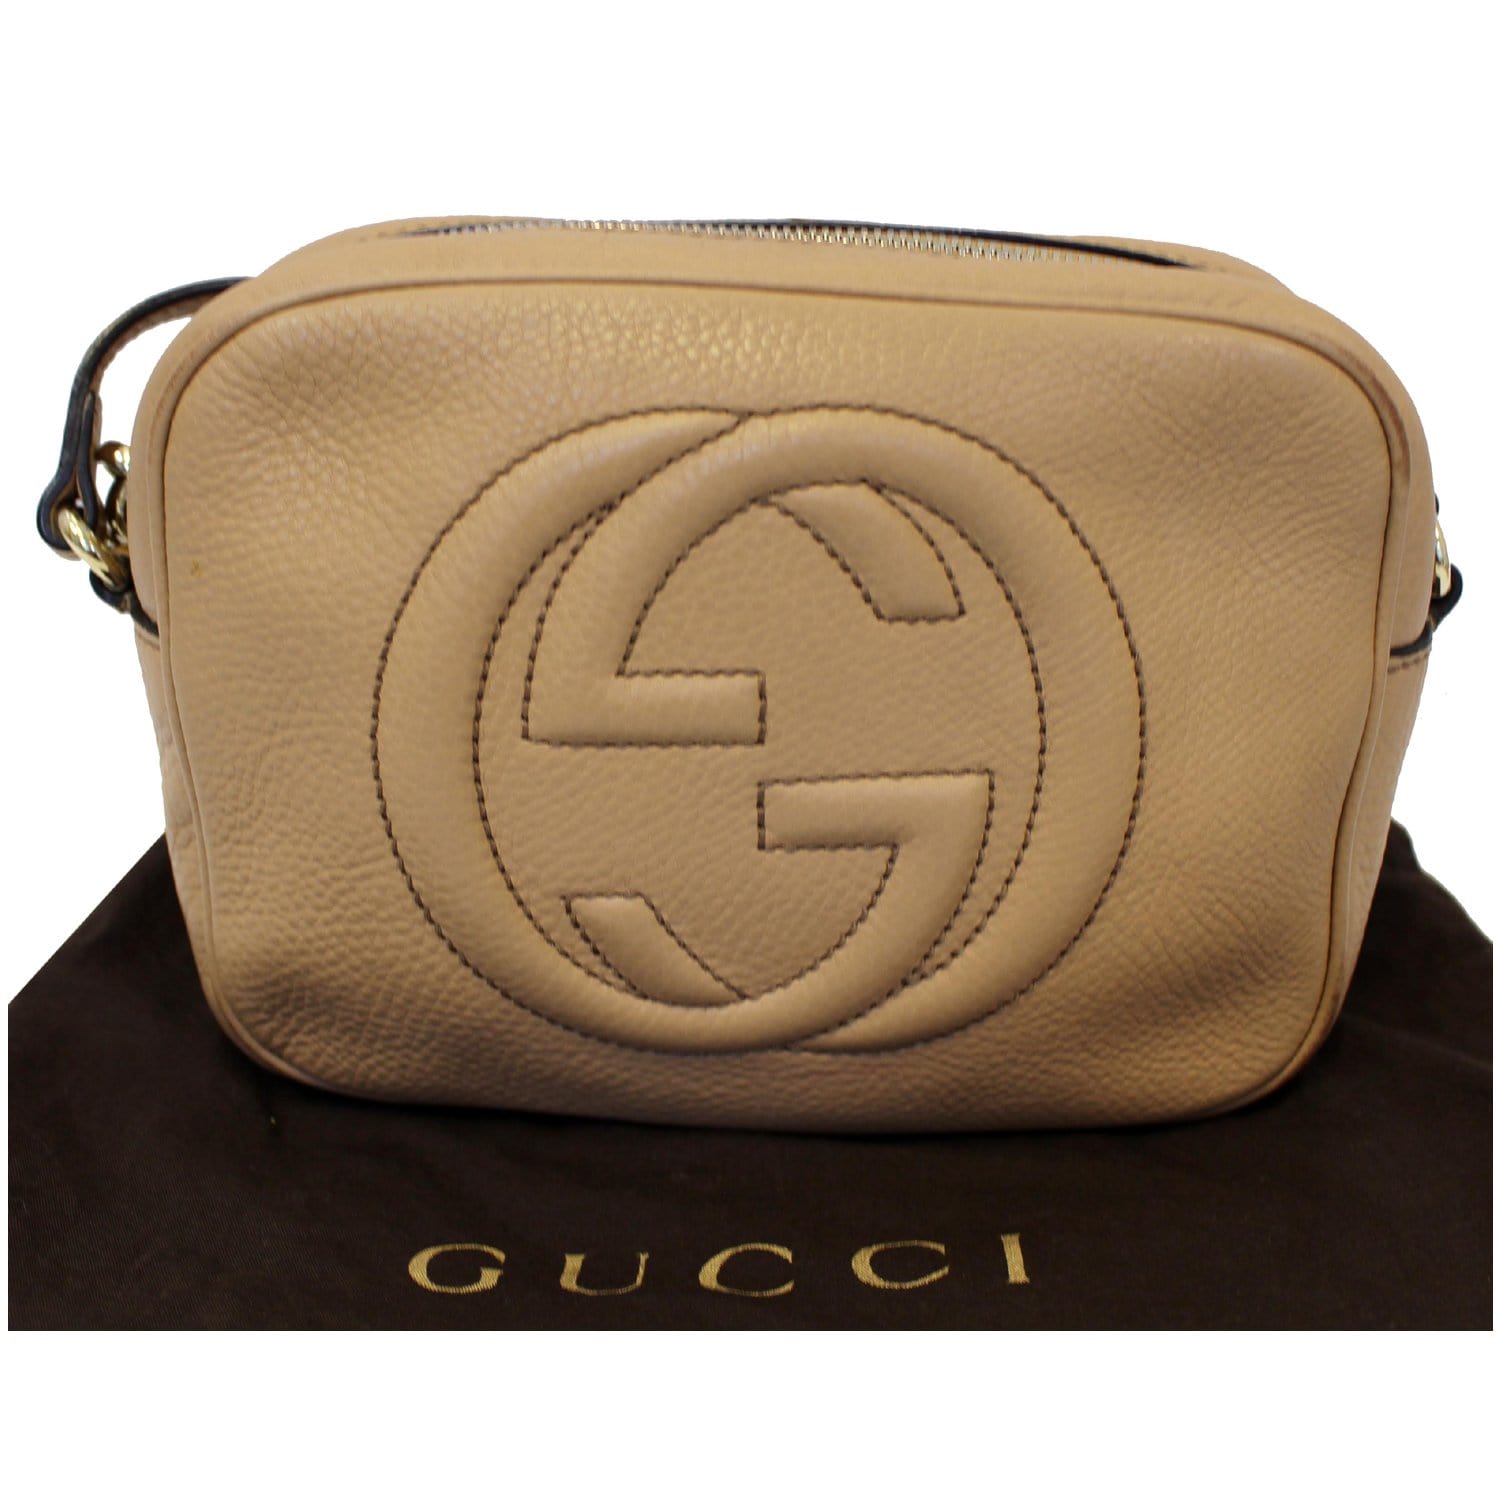 GUCCI SOHO disco bag brown Ladies Authentic branded